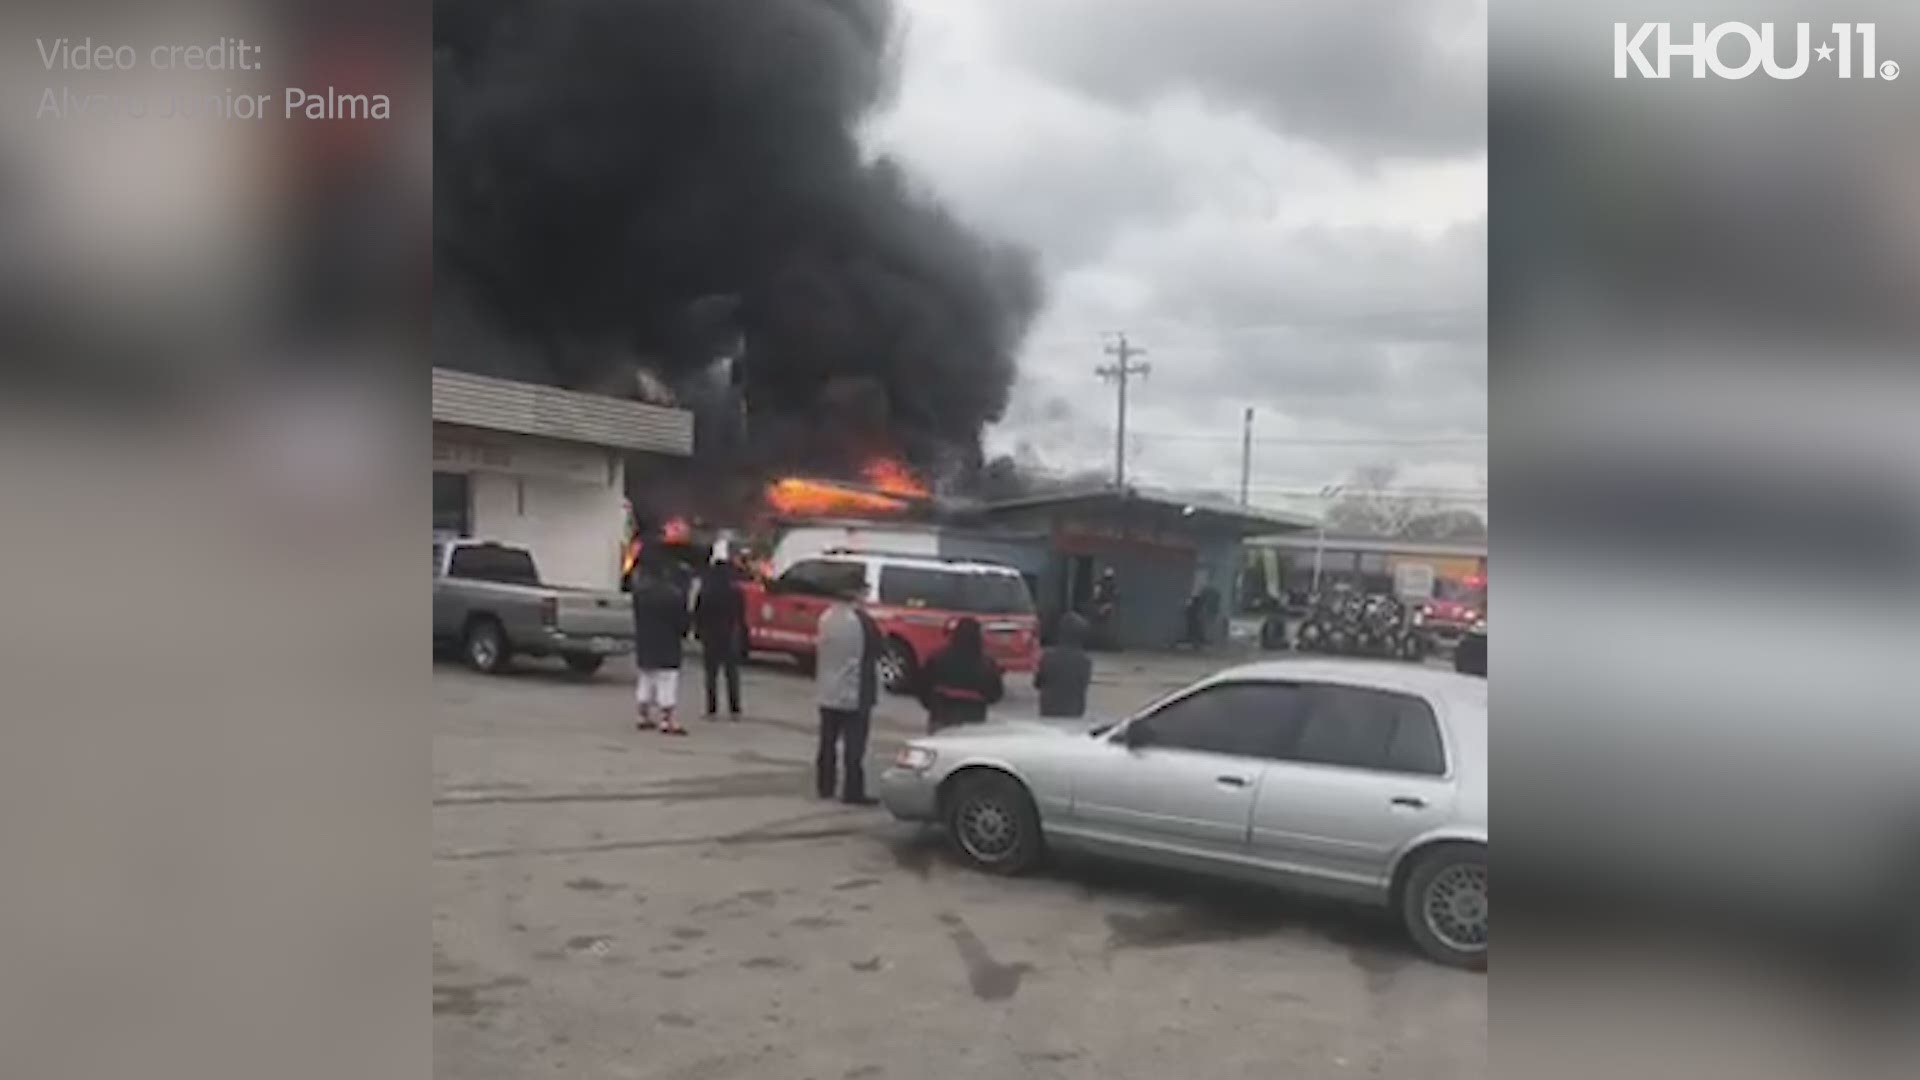 A tire shop in north Harris County caught fire on Feb. 20, 2020.